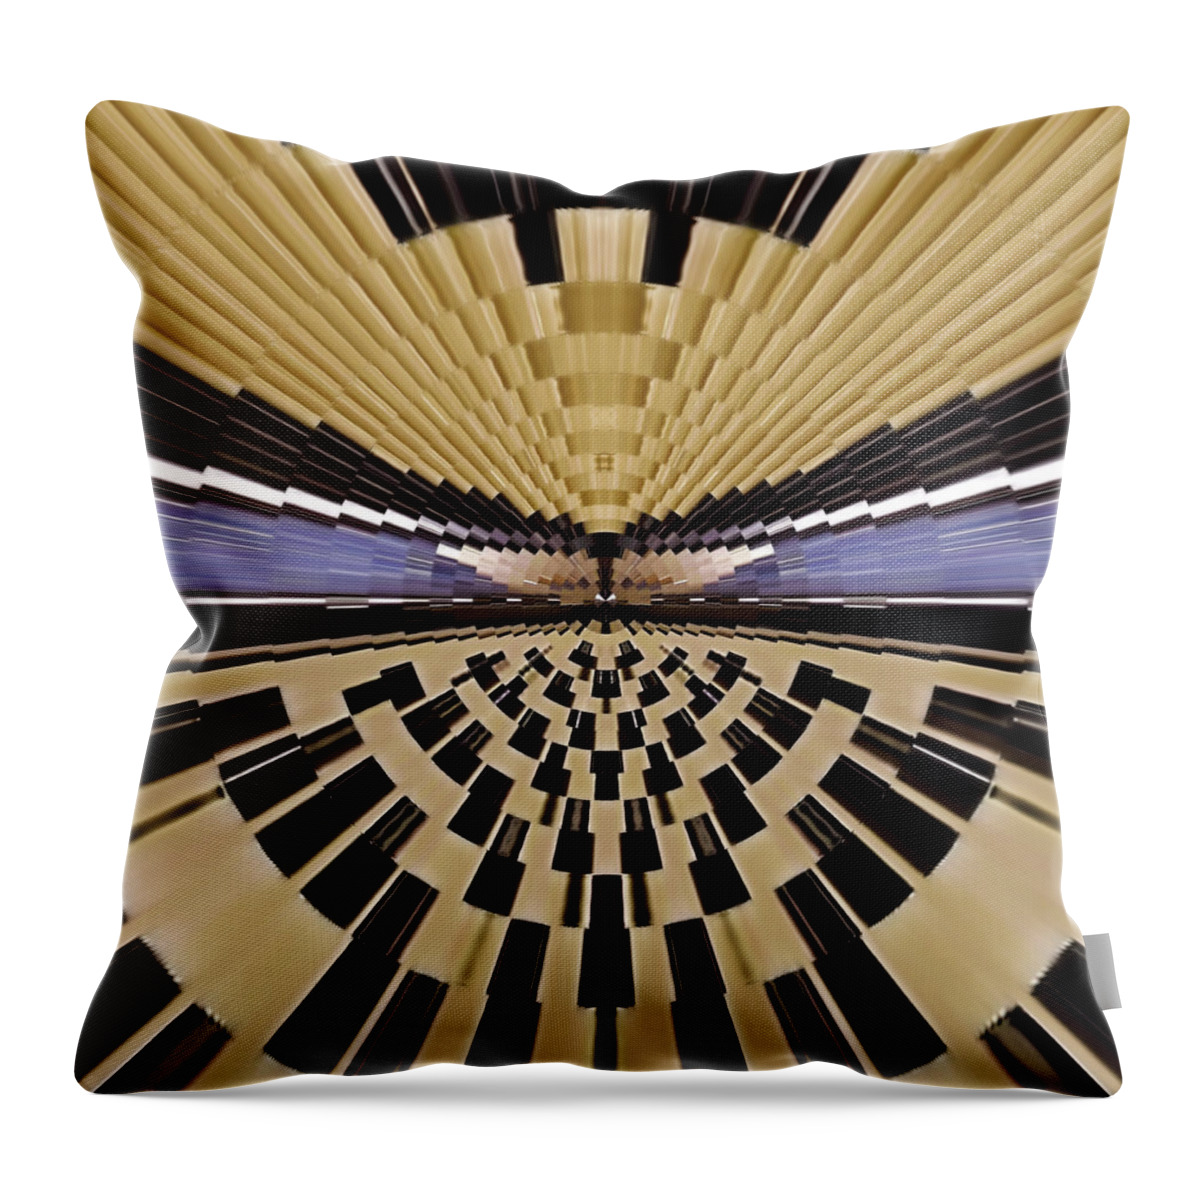 Accordion Deco Throw Pillow featuring the photograph Accordion Deco by James Stoshak